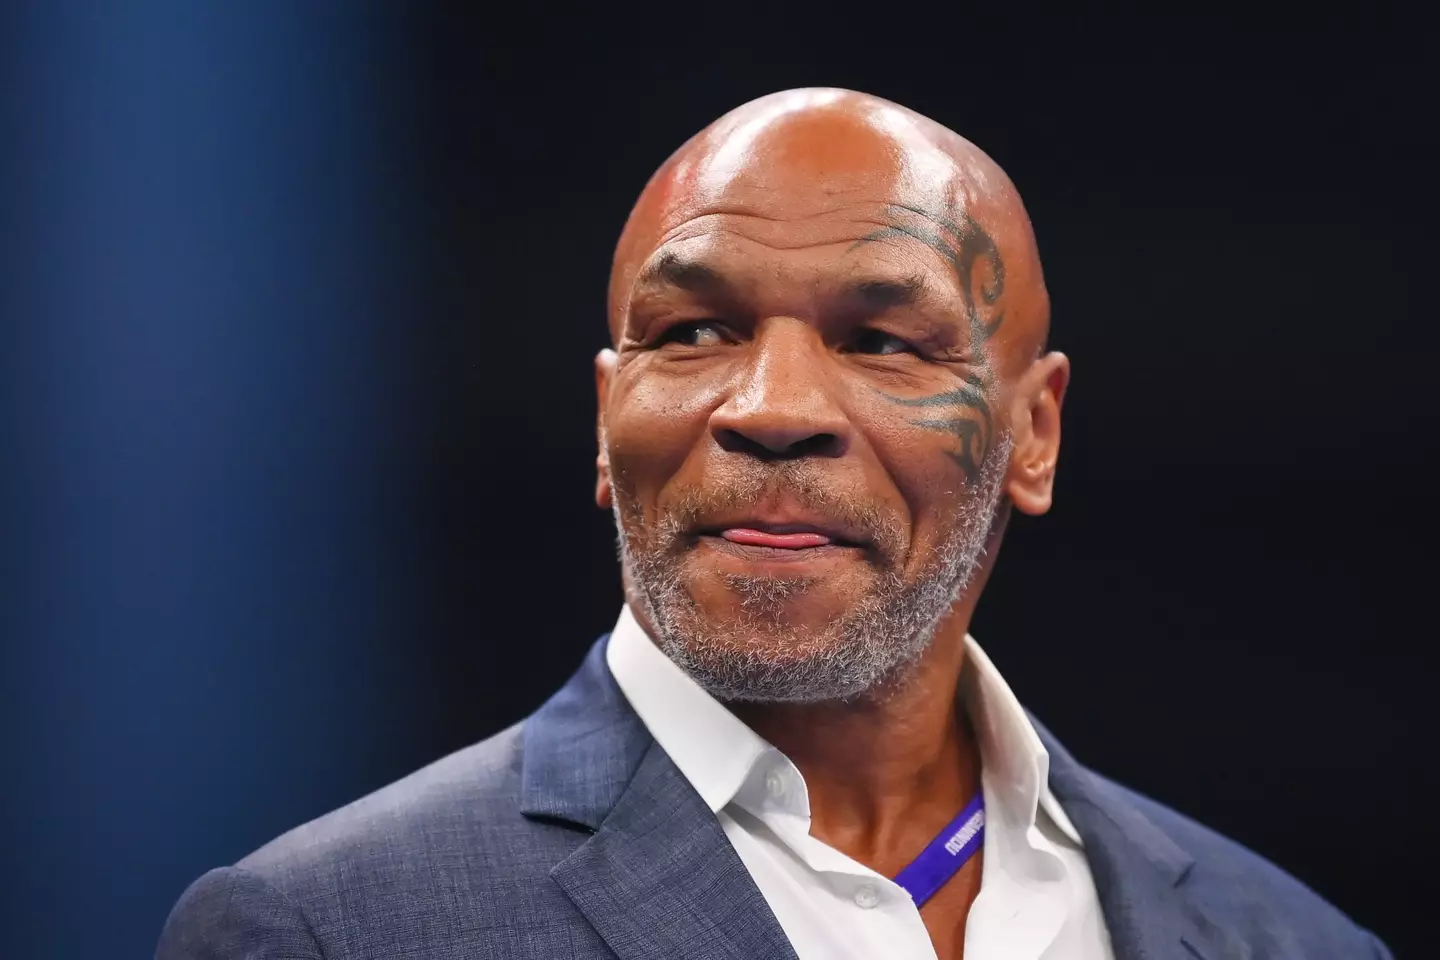 Mike Tyson during the Tyson Fury vs. Francis Ngannou fight. Image: Getty